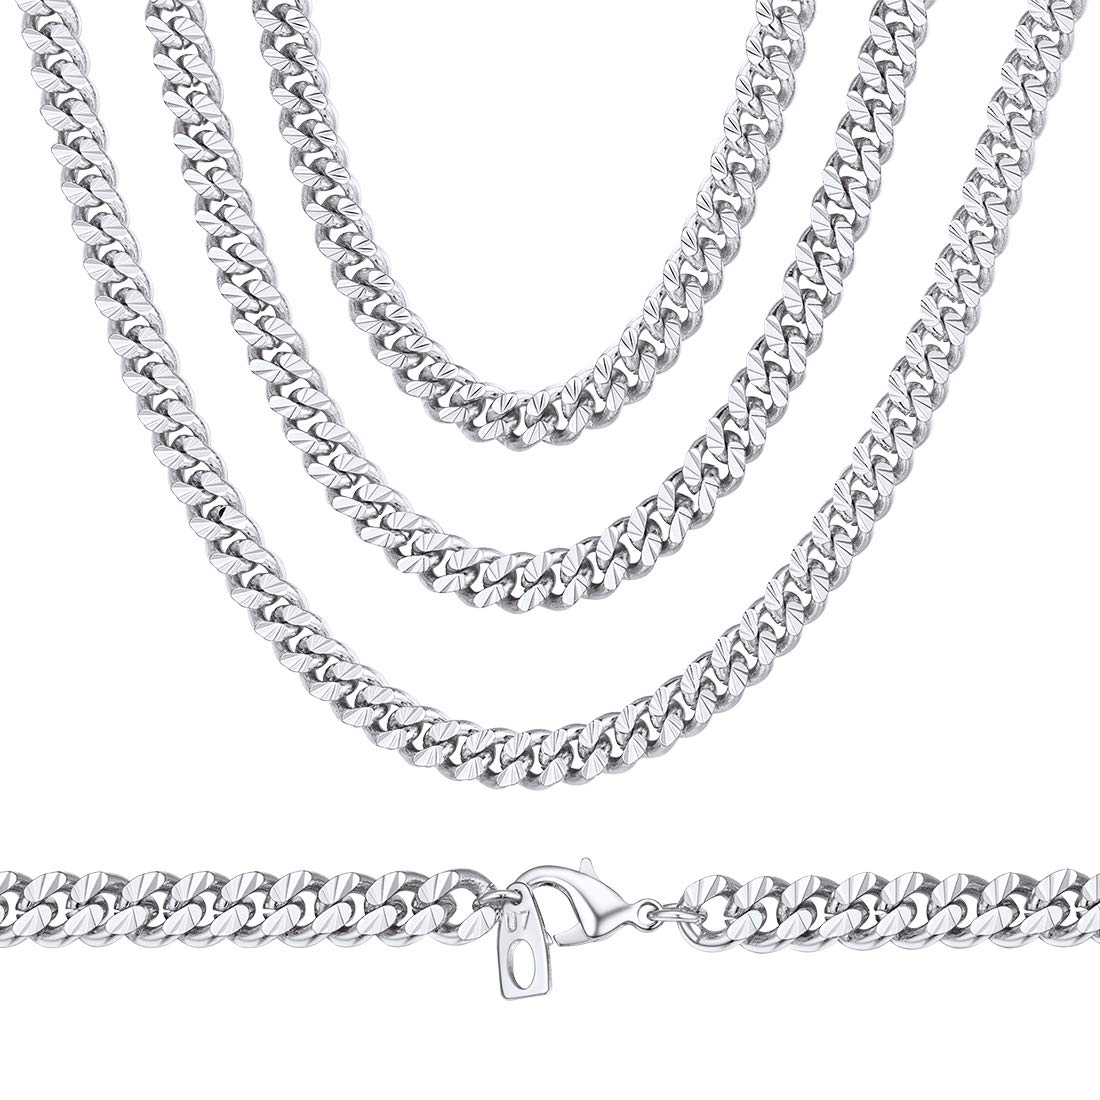 24 X U7 MACHINE CARVING CUBAN CHAIN NECKLACE FOR WOMEN, ENGRAVE FIGURES PATTERN, NK 1:1, 4.5MM WIDE, 26 INCH(66CM) LENGTH, PLATINUM PLATED TRENDY UNISEX JEWELRY CURB NECKLACE, N838B-4-26 - TOTAL RRP